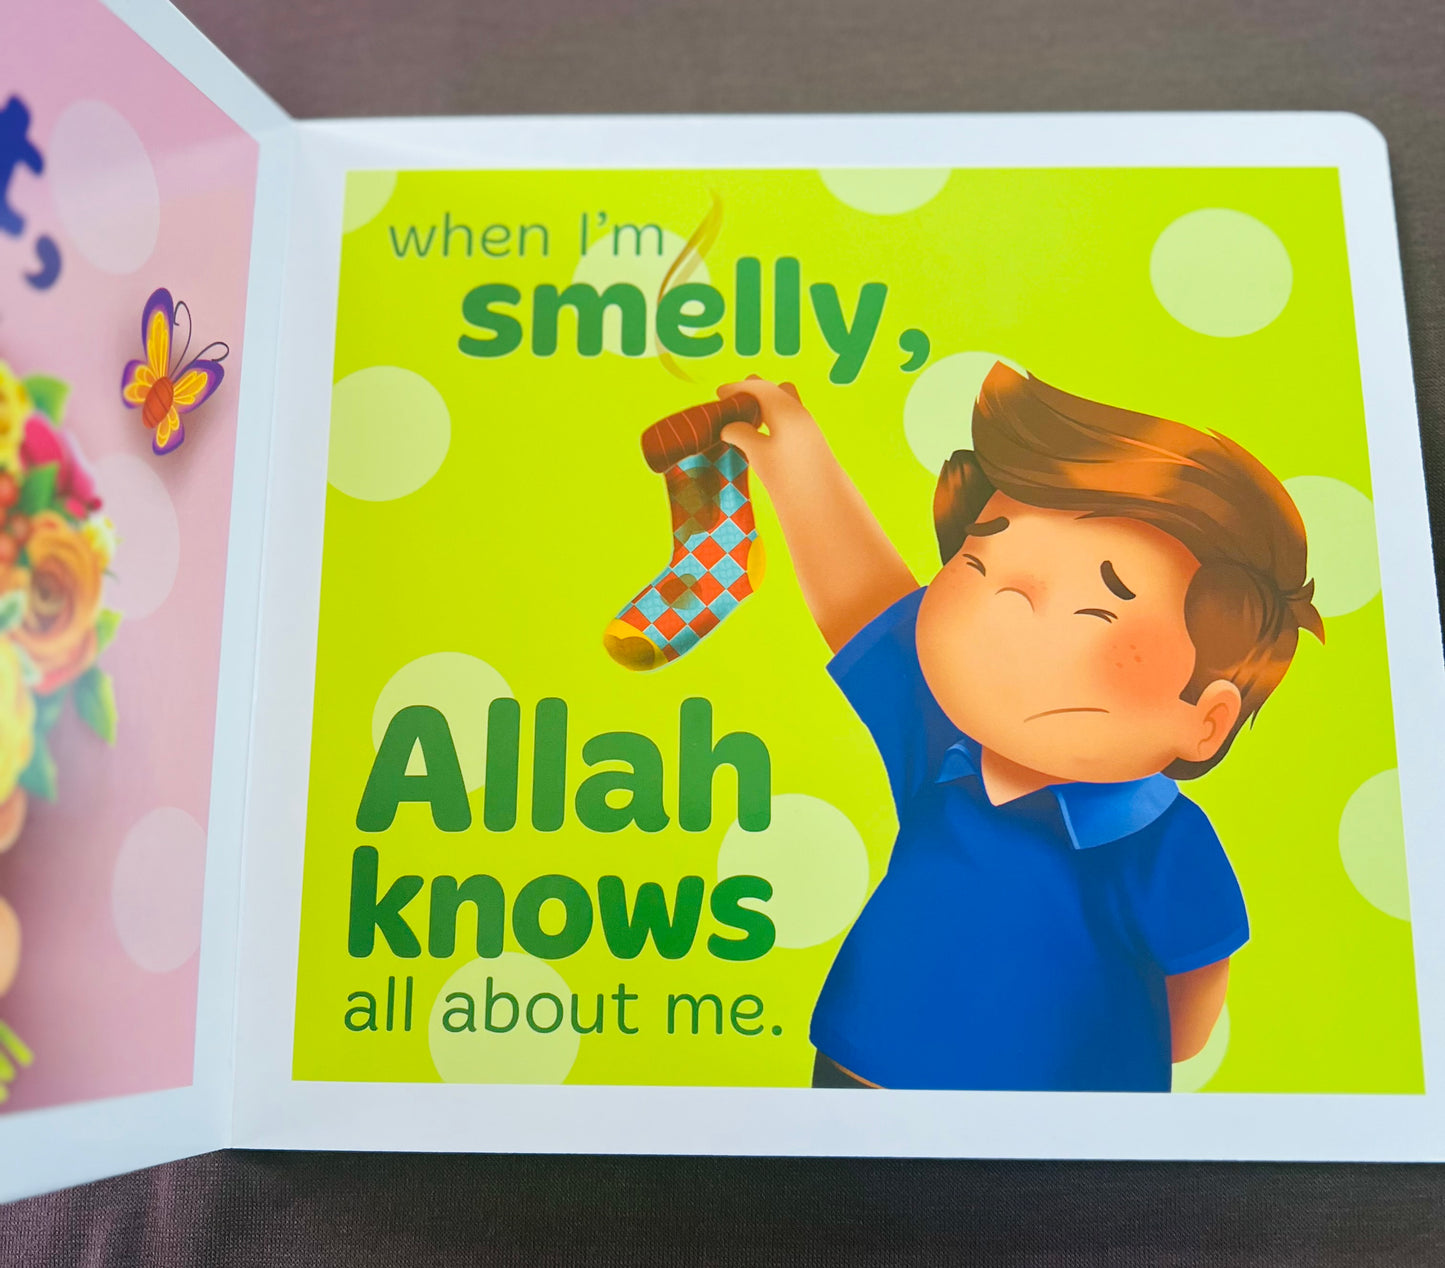 Allah Knows All About Me BoardBook